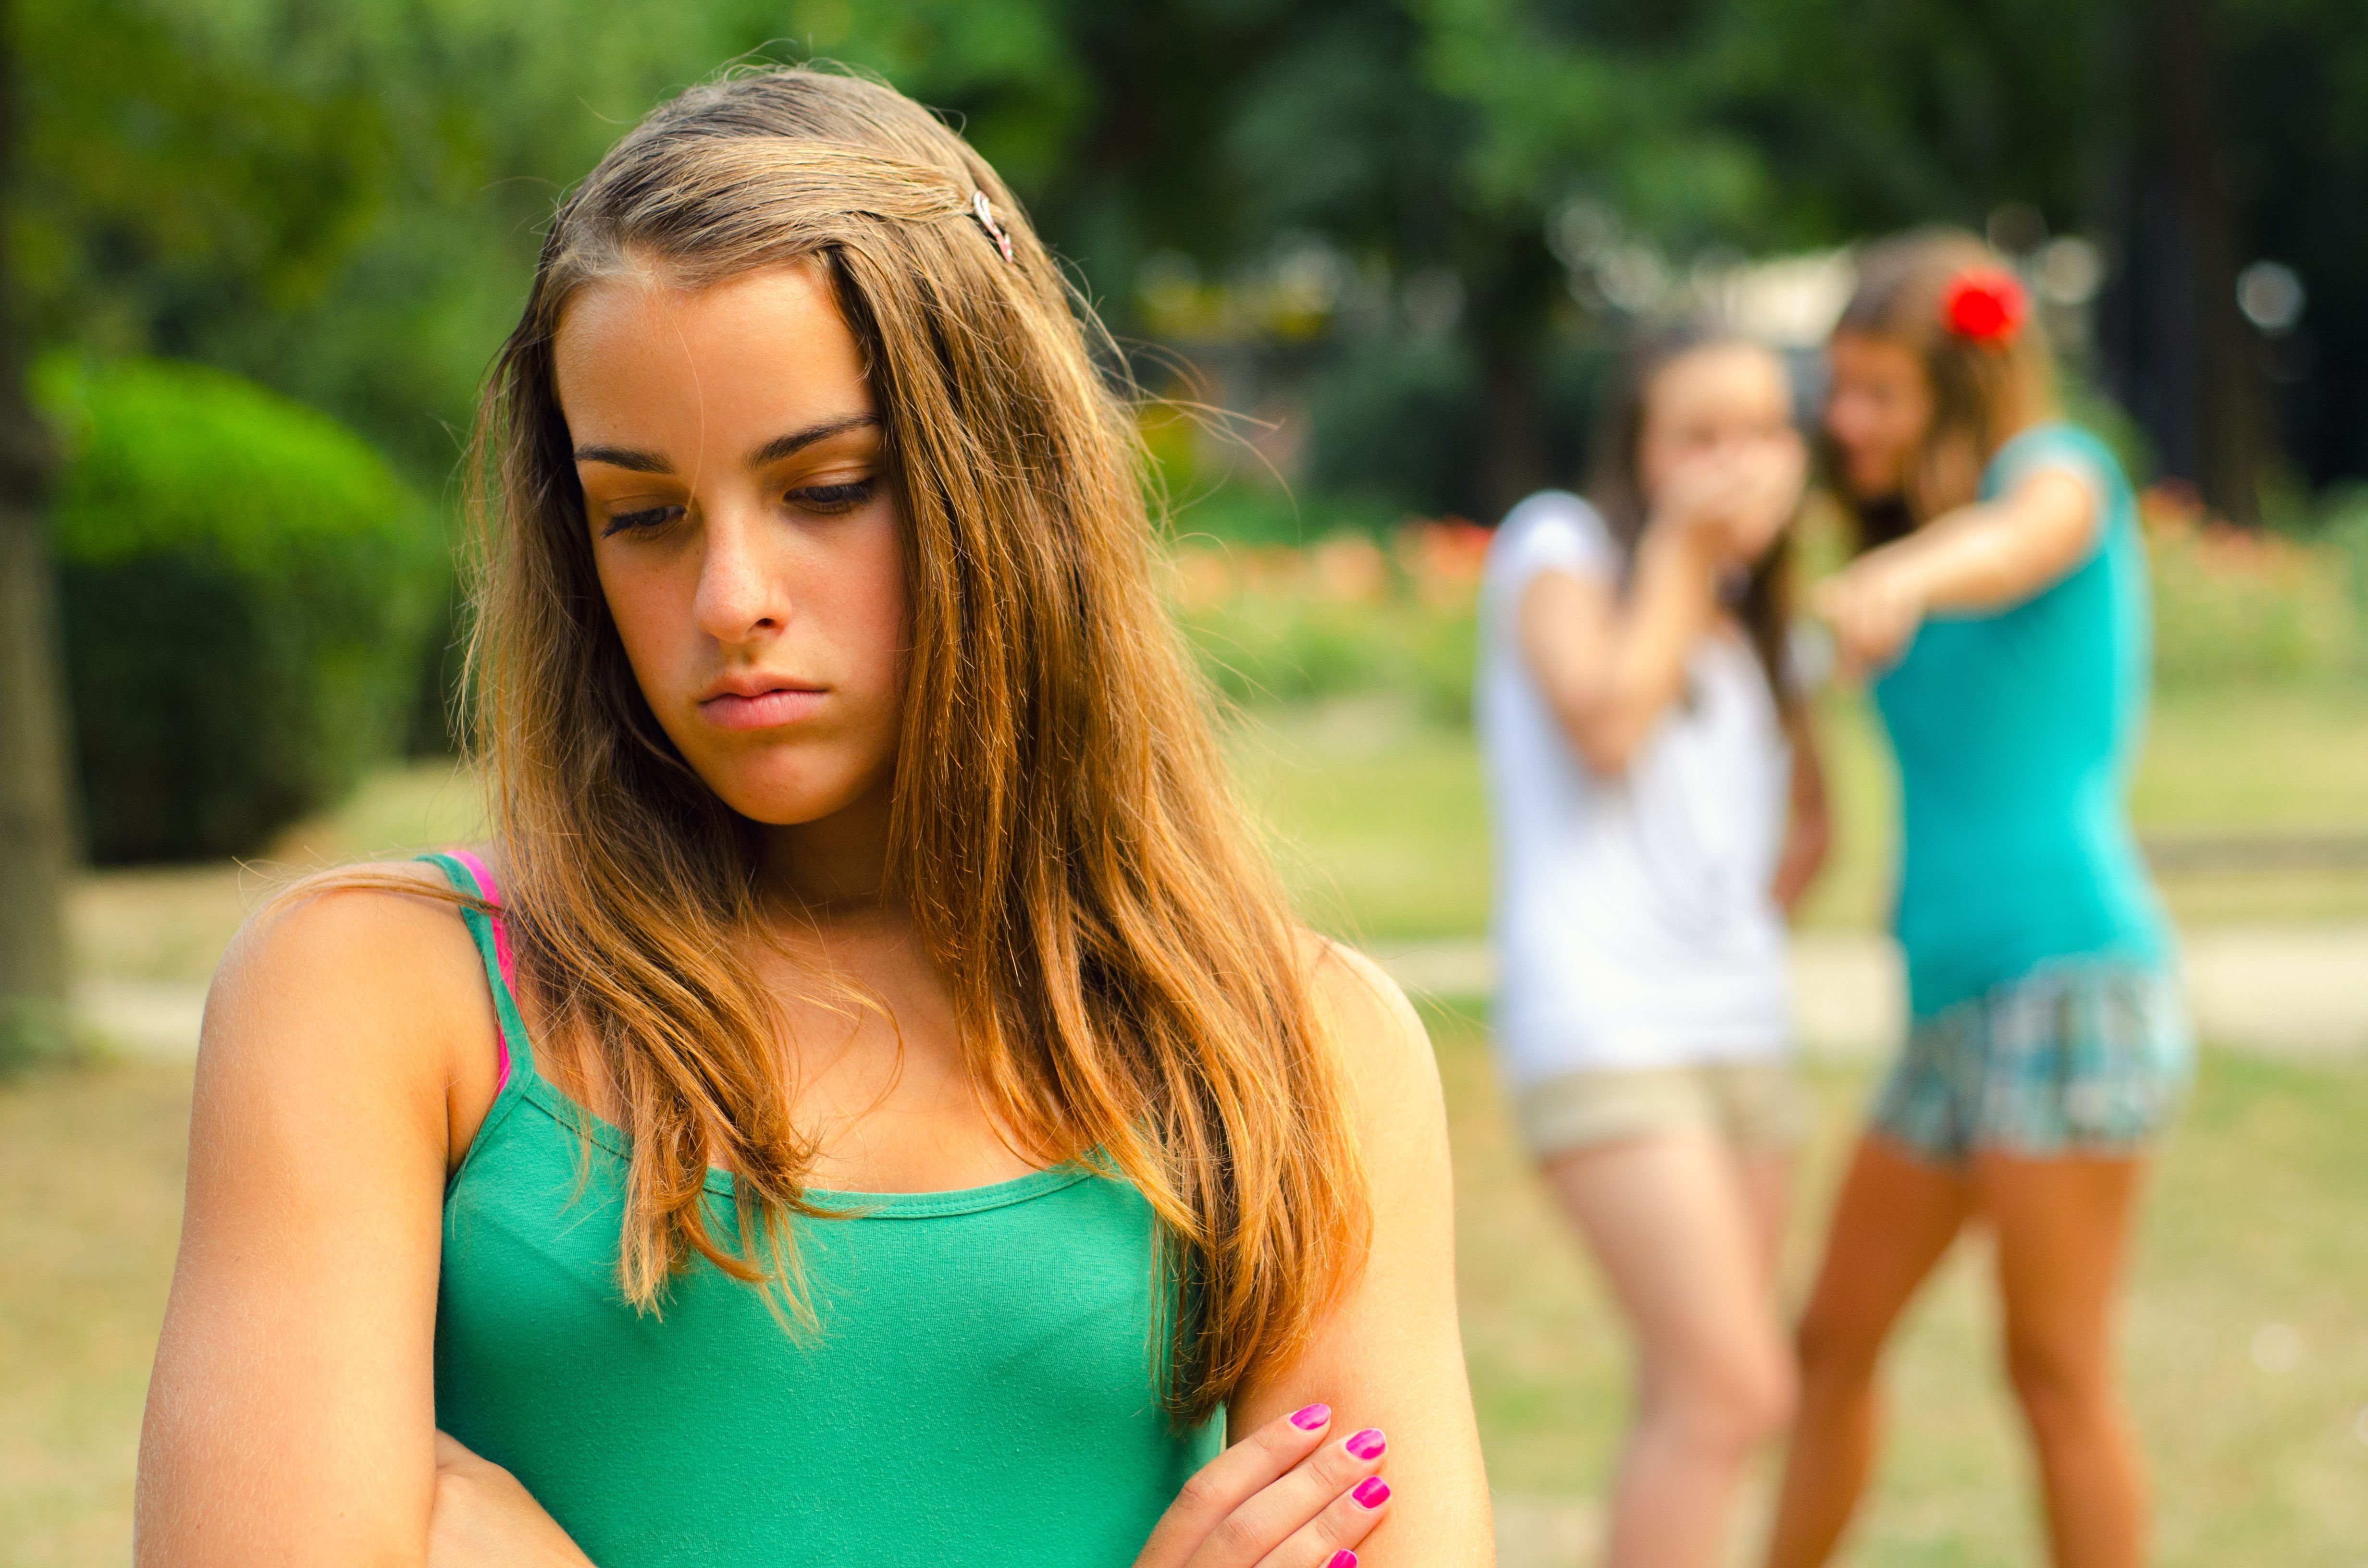 A teen looks sad while her peers tease her. | Source: Shutterstock